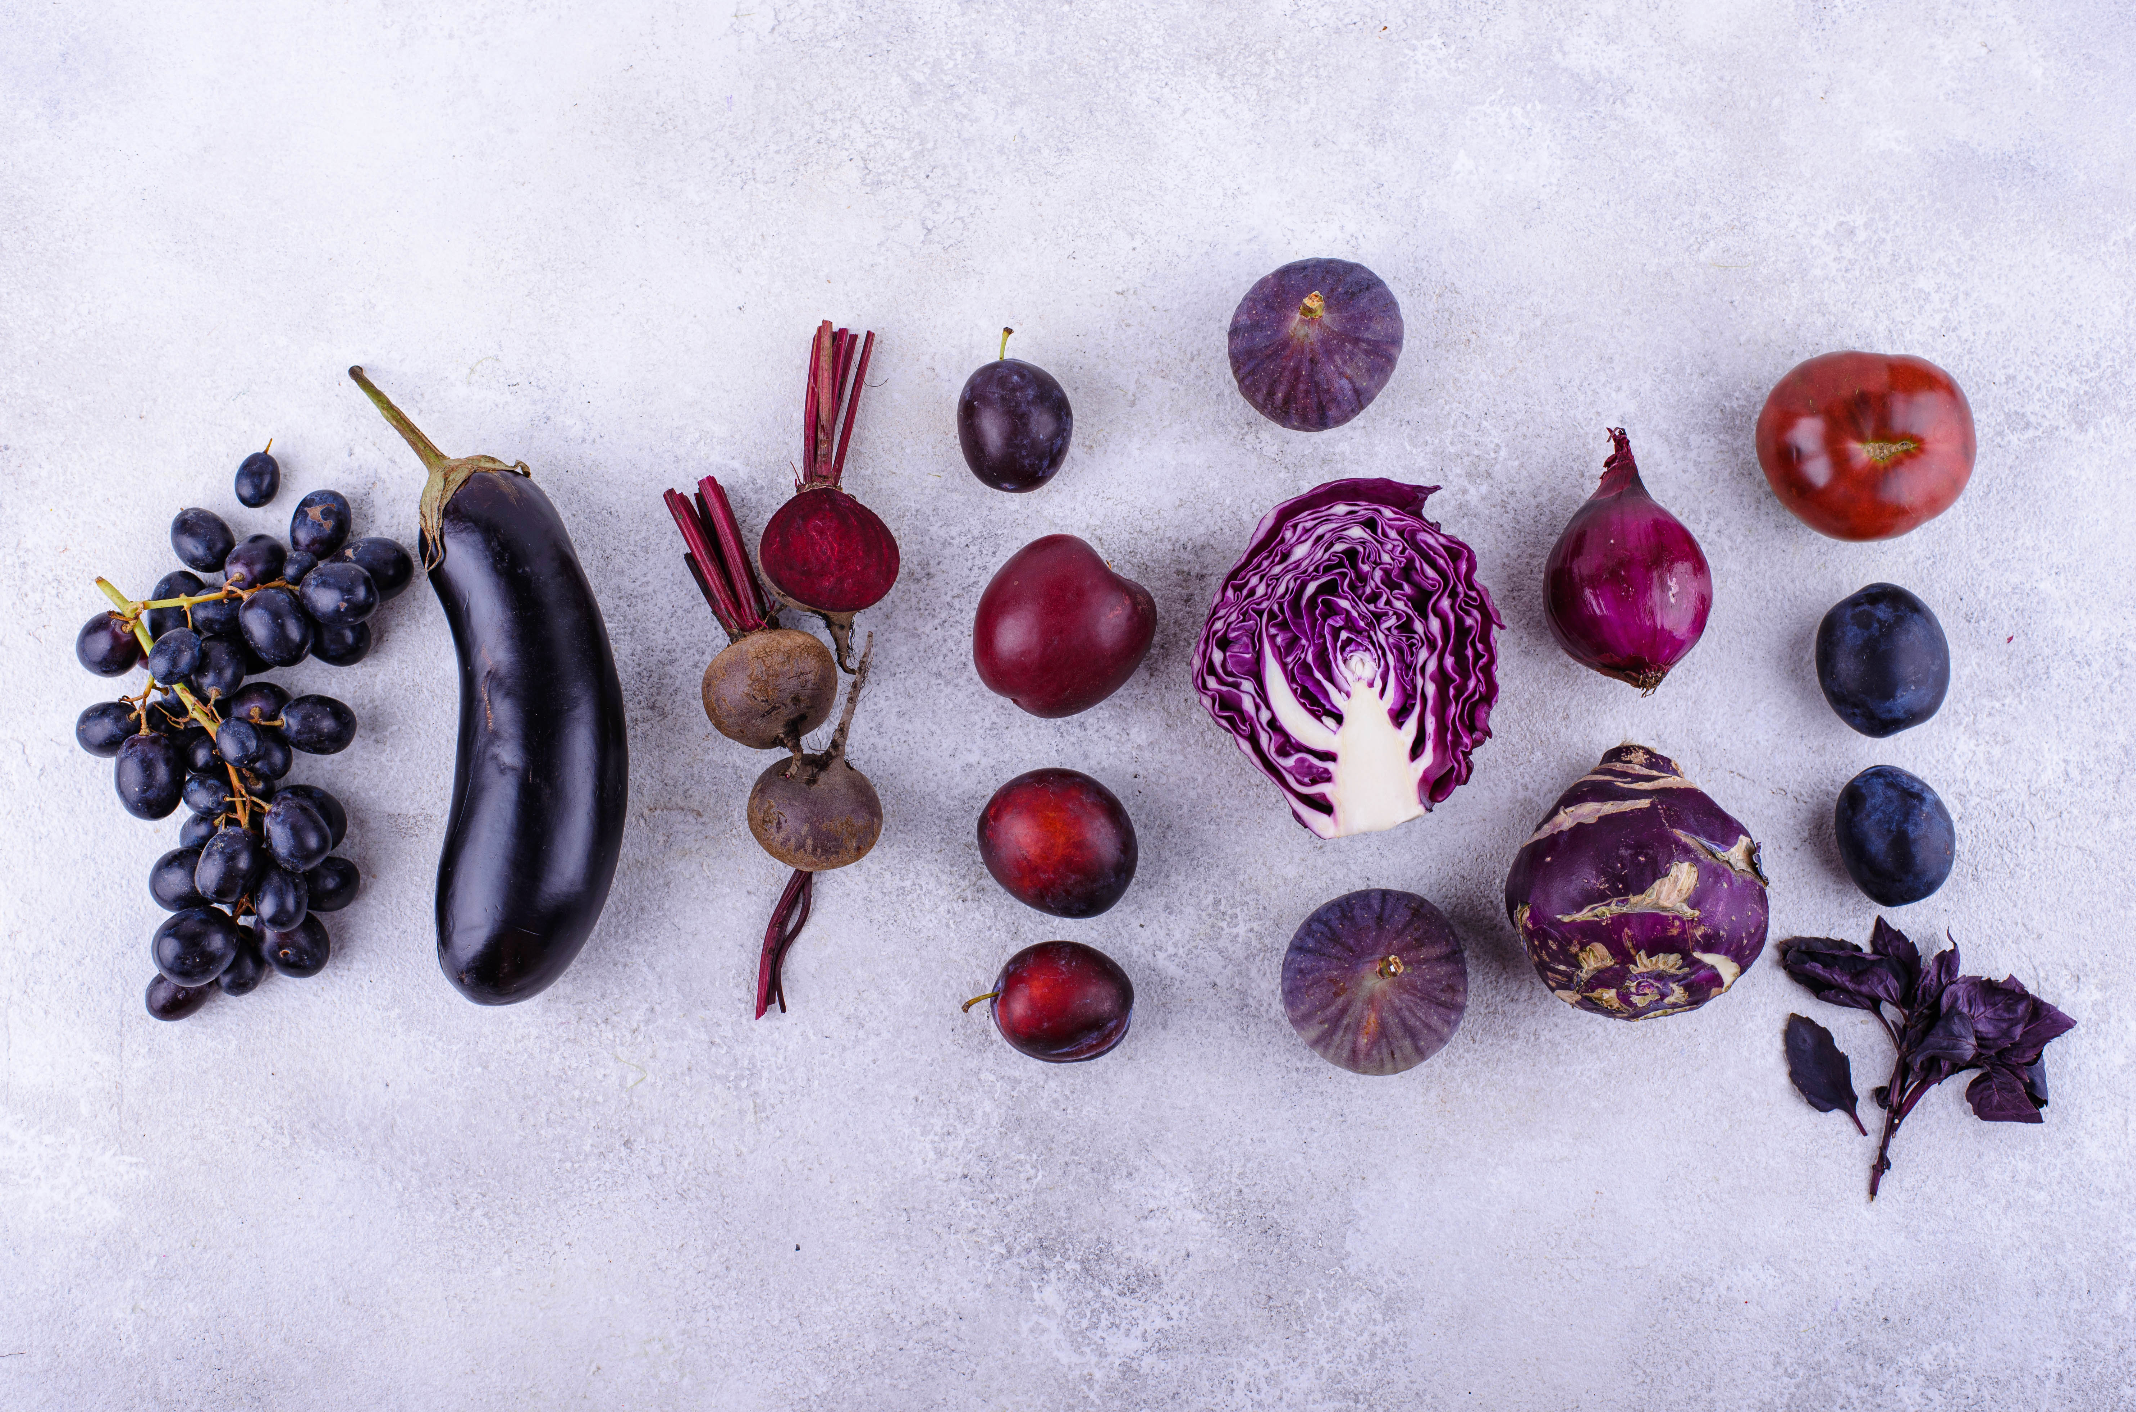 Overhead image of purple produce like eggplant, grapes, cabbage, figs, plums and beets